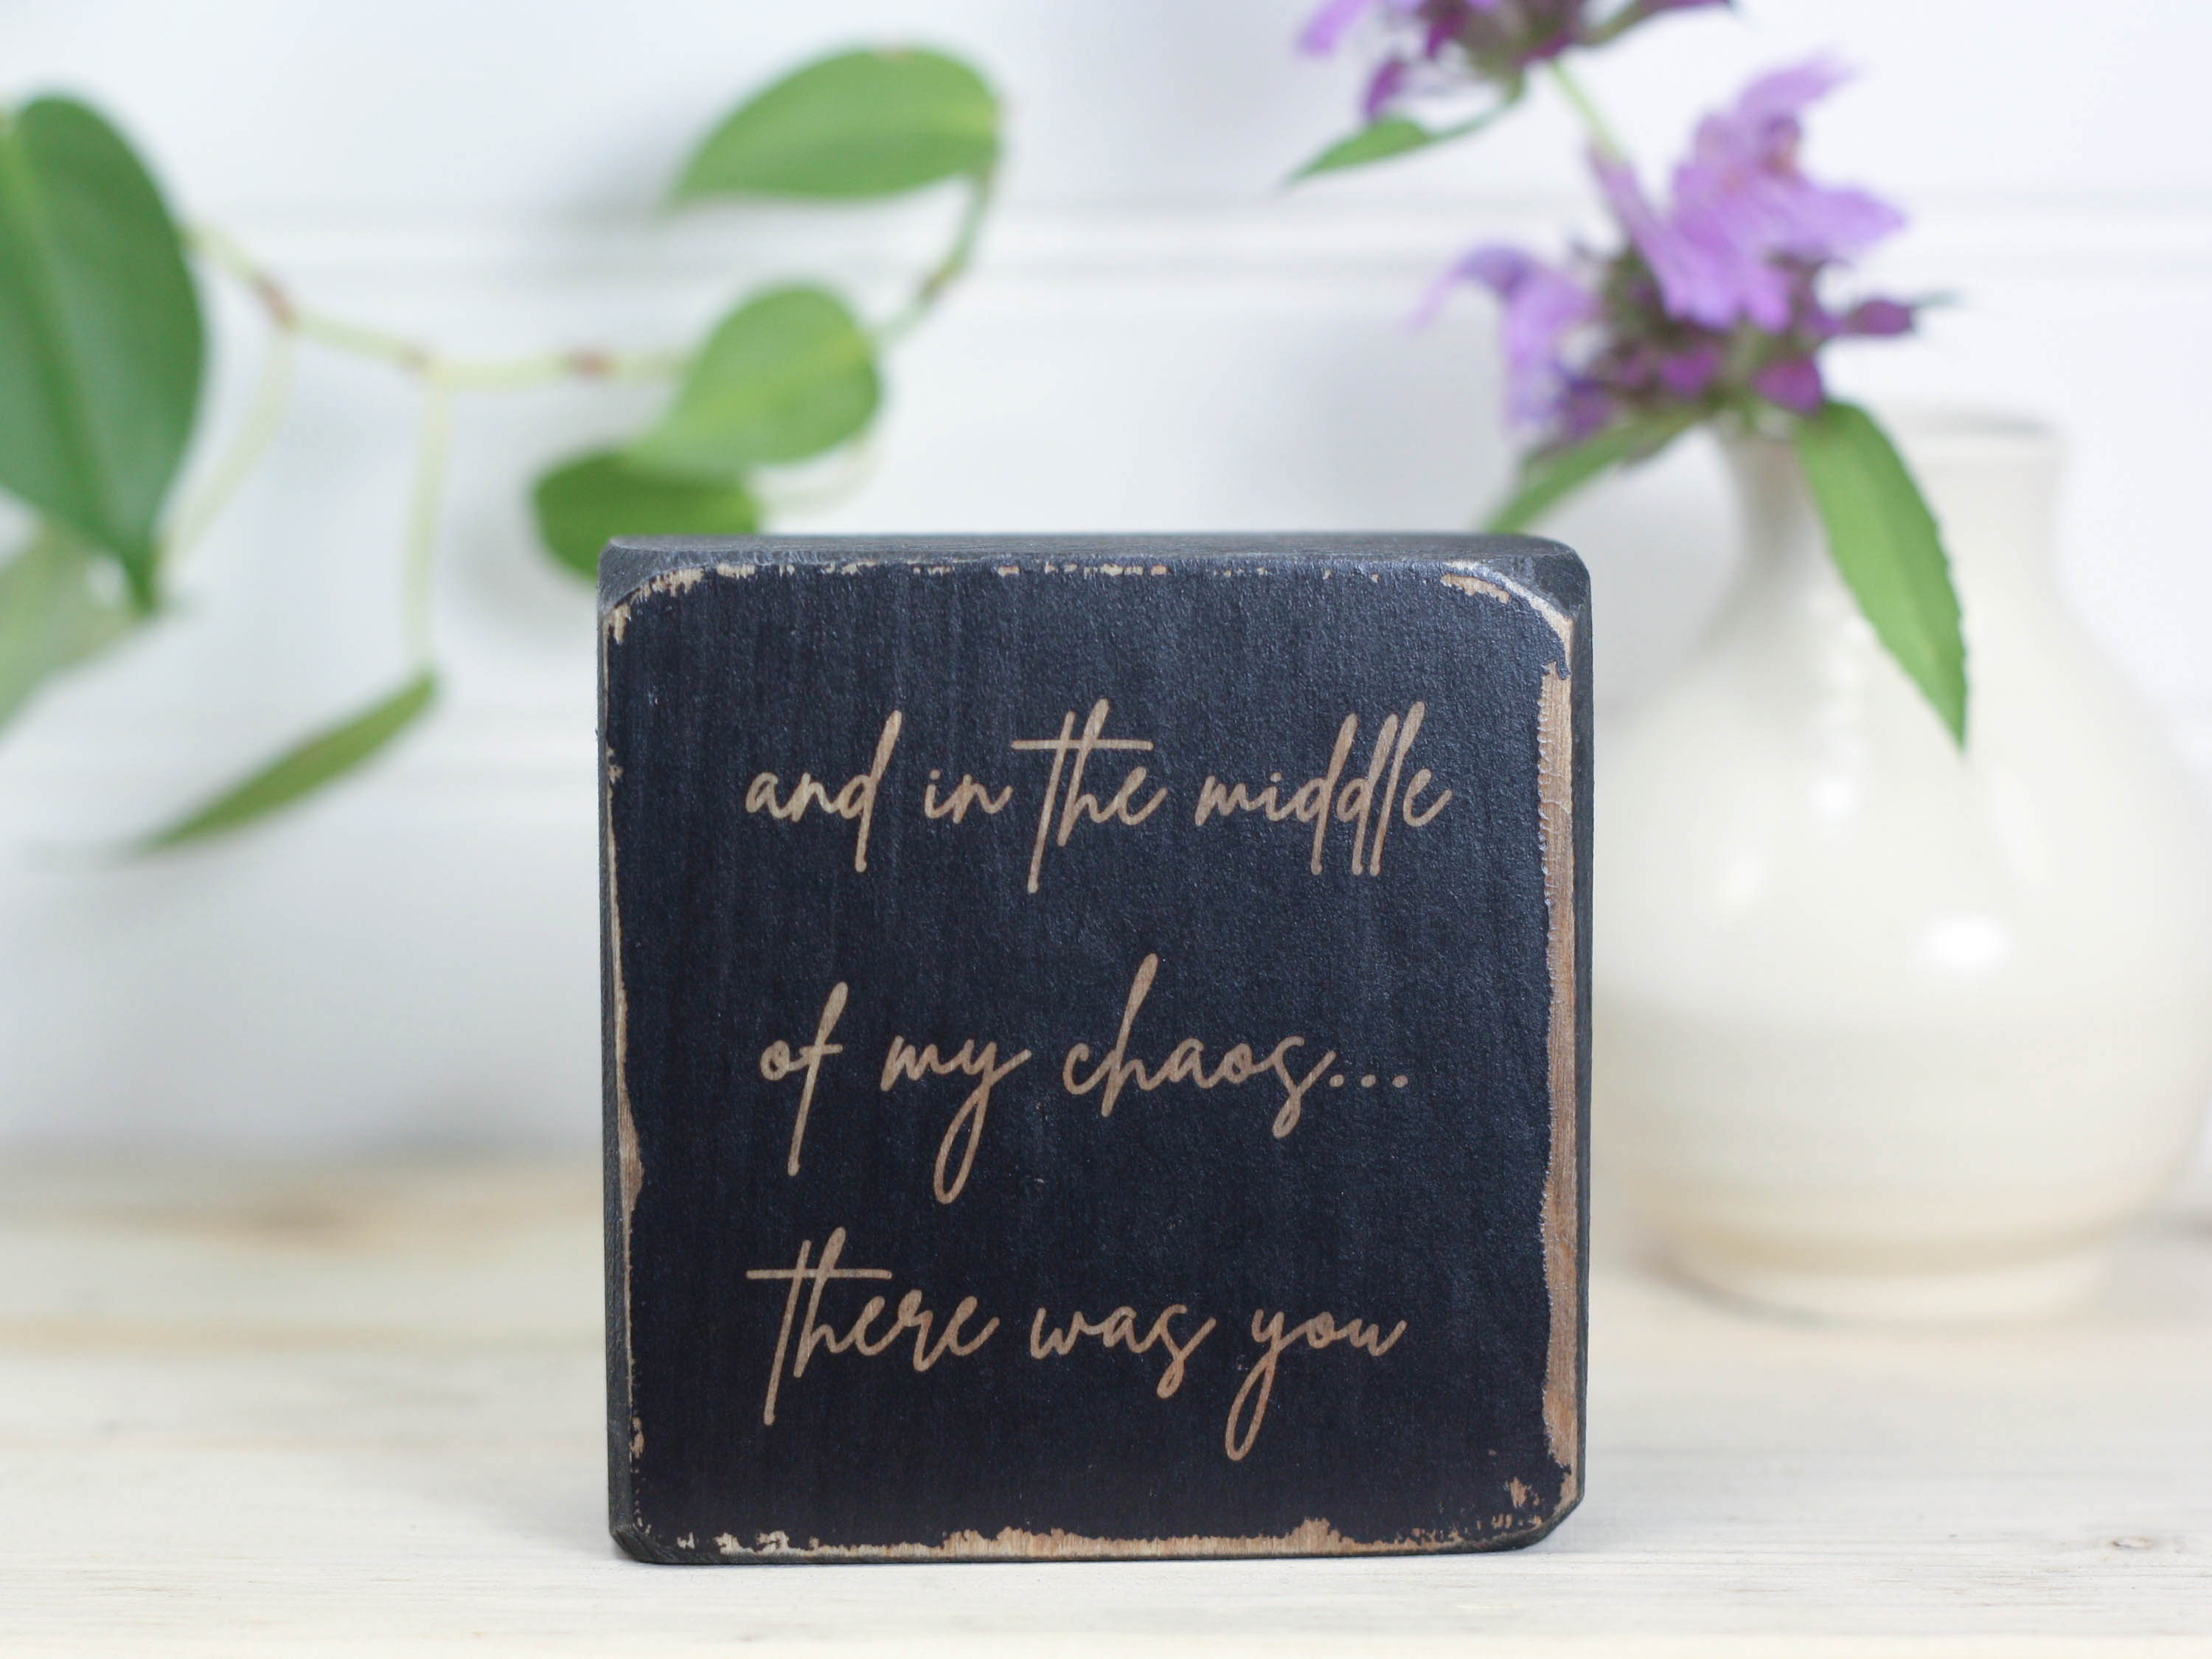 Small wood block in distressed black with the saying "and in the middle of my chaos...there was you".